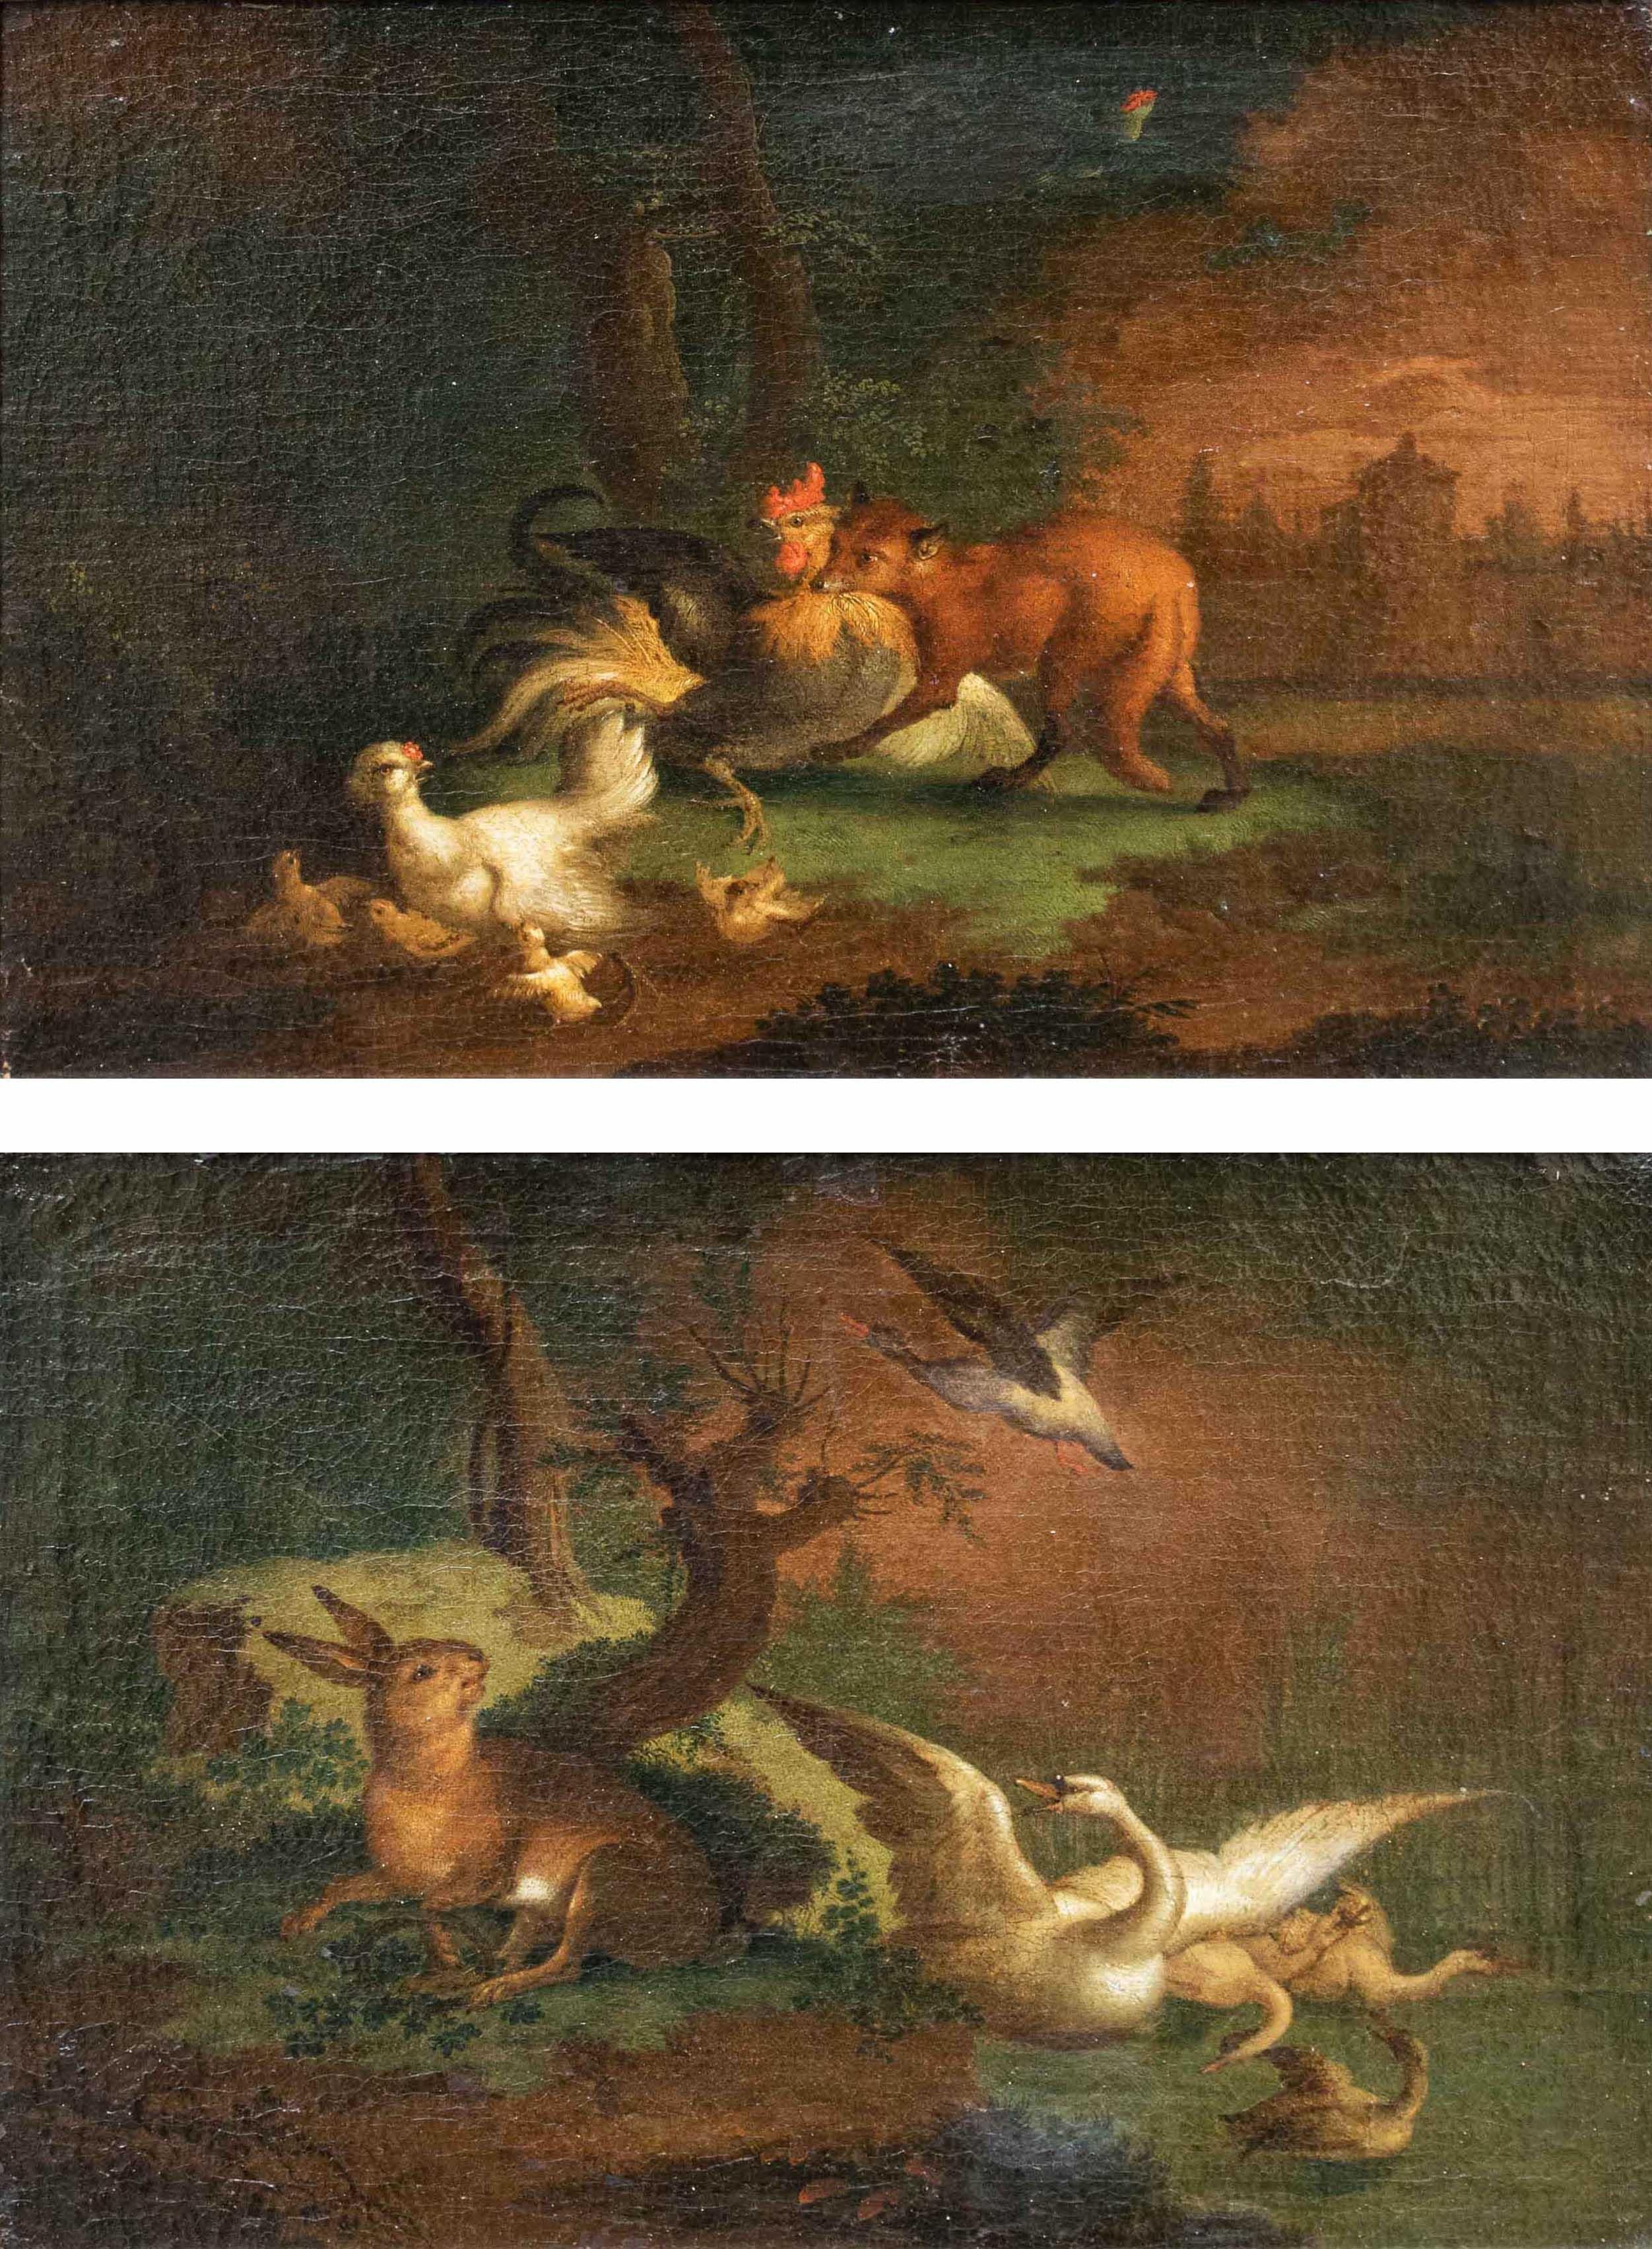 Flemish School, 17th century

Live nature couple with animals

Measures: Oil on canvas, cm 25 x 35 - With frame cm 37 x 48

The pair of canvases in question depicts two excited moments of hunting; in the first work there are a hare and swans